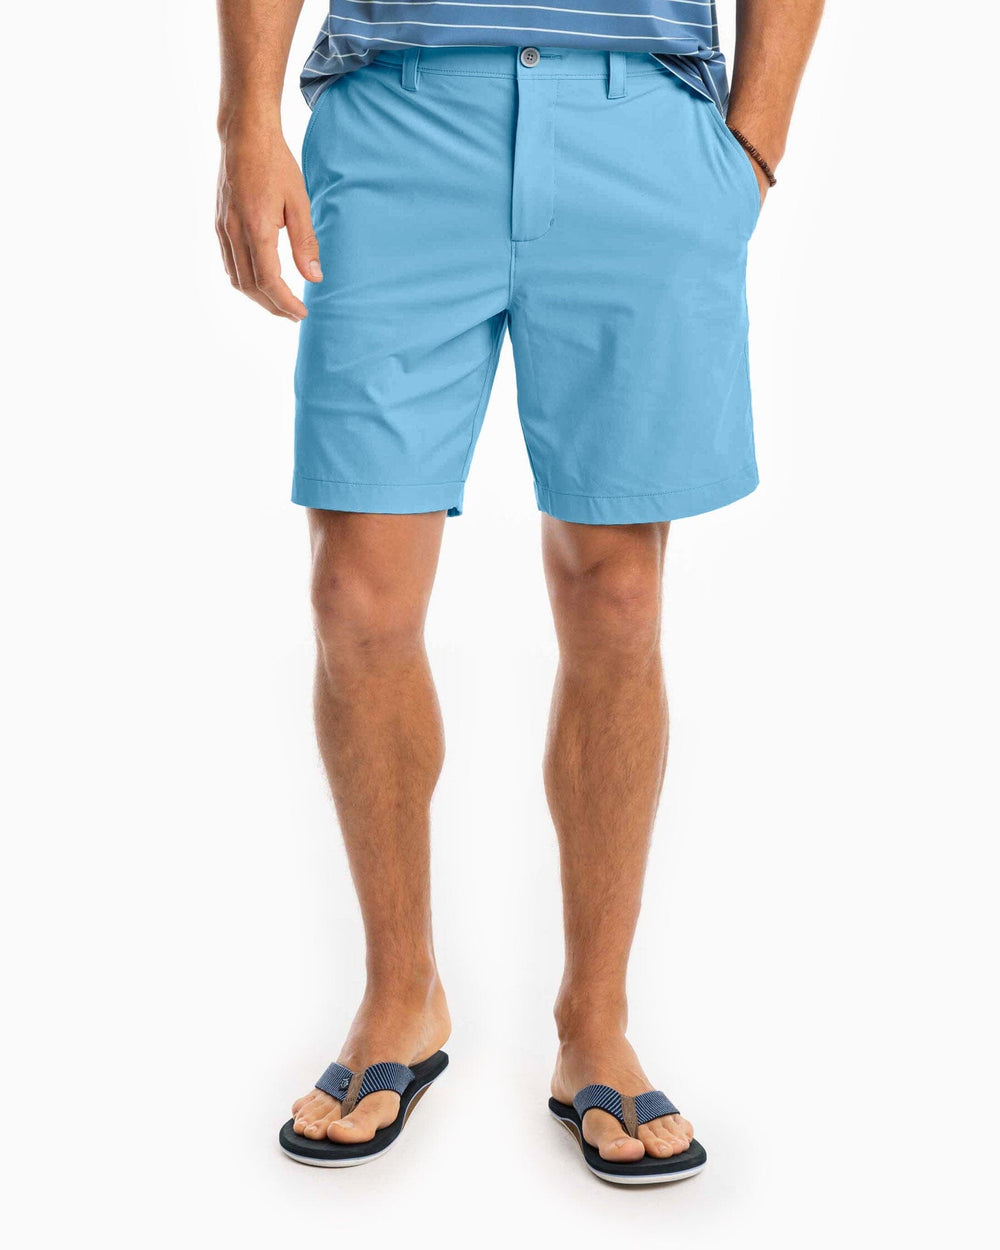 The front of the Men's Gulf 8 Inch Brrr Performance Short by Southern Tide - Boat Blue